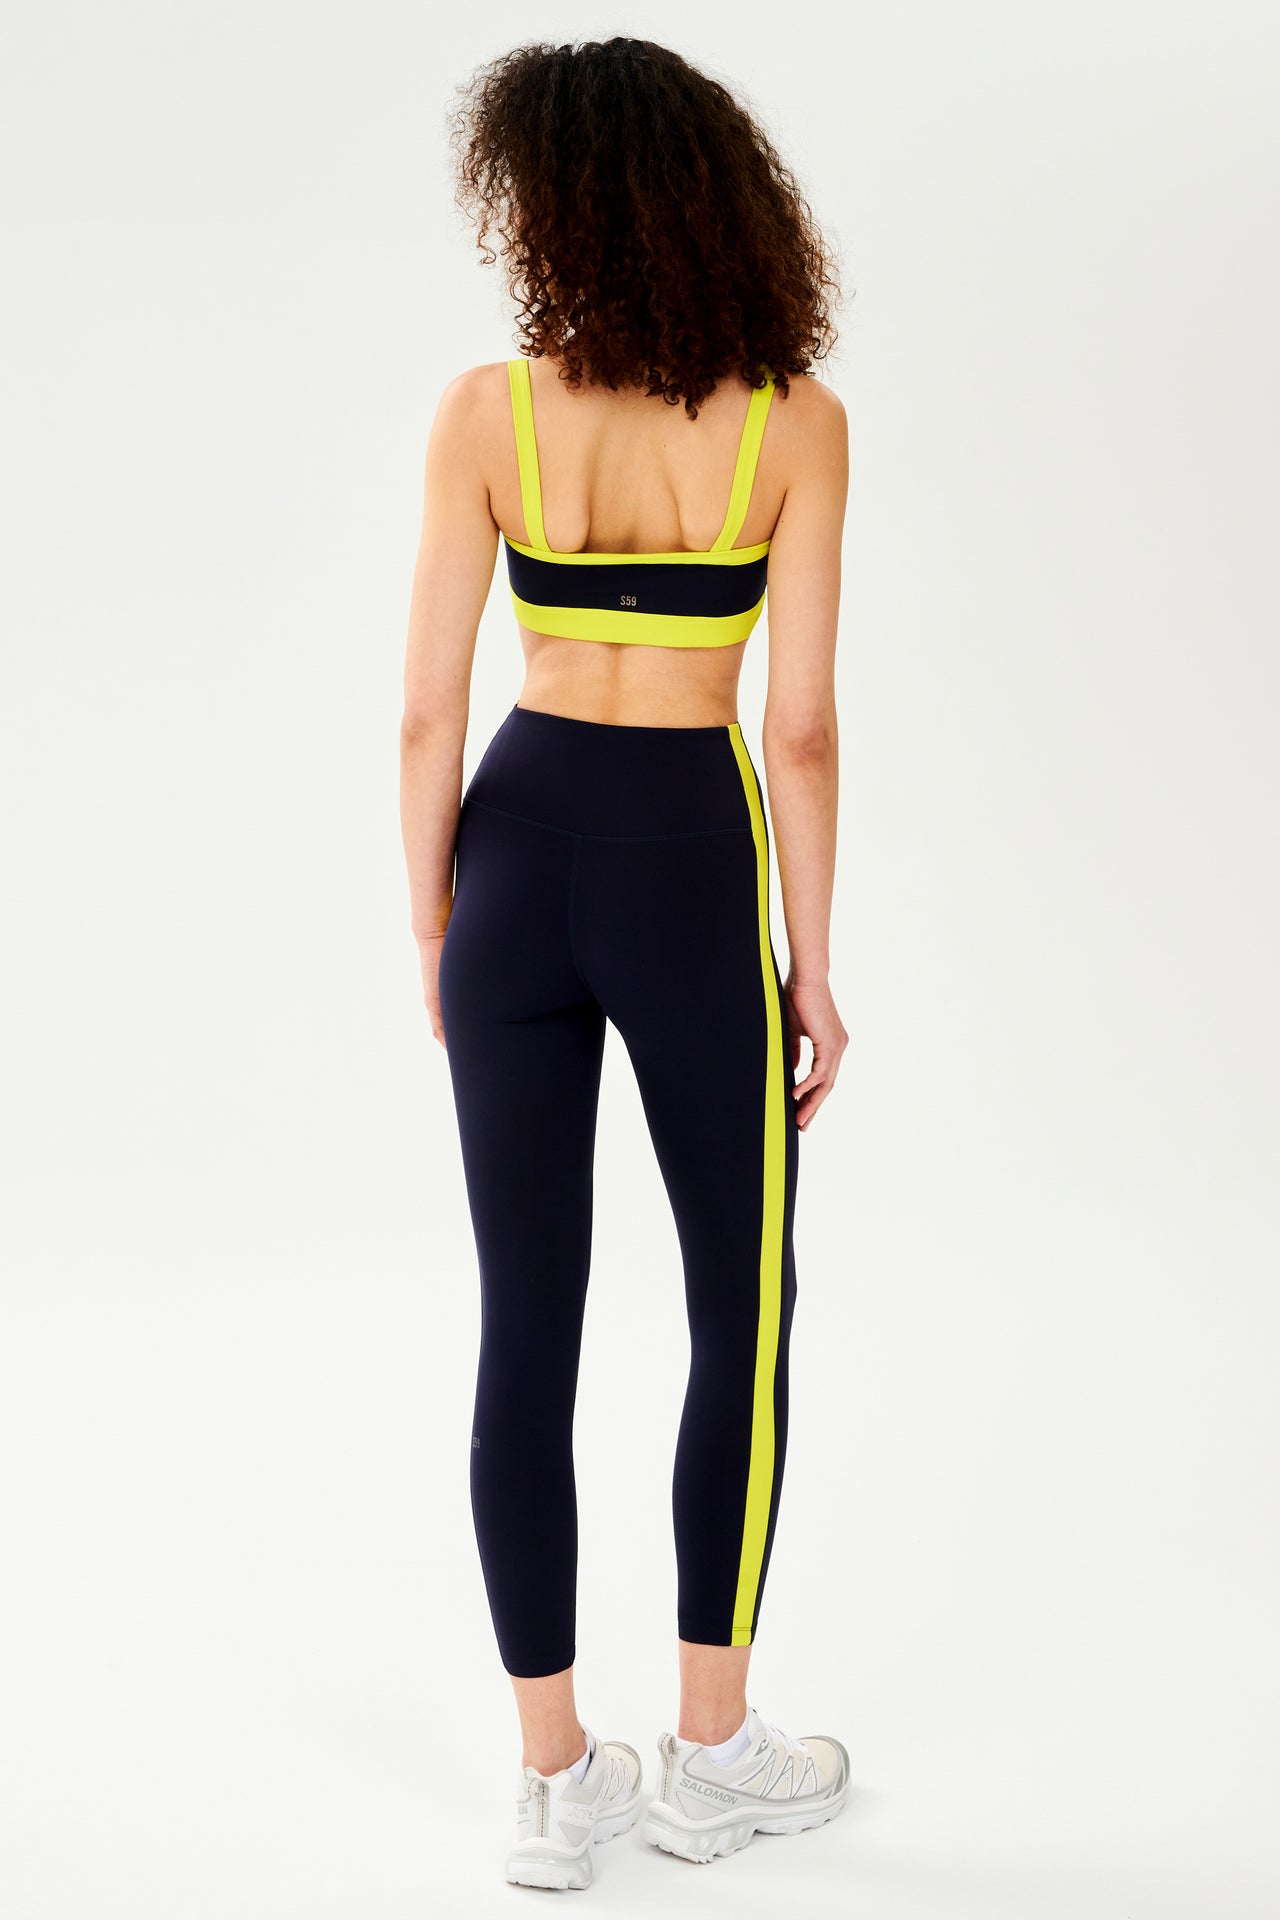 The back view of a woman in comfortable SPLITS59 black and yellow leggings designed for workout support.